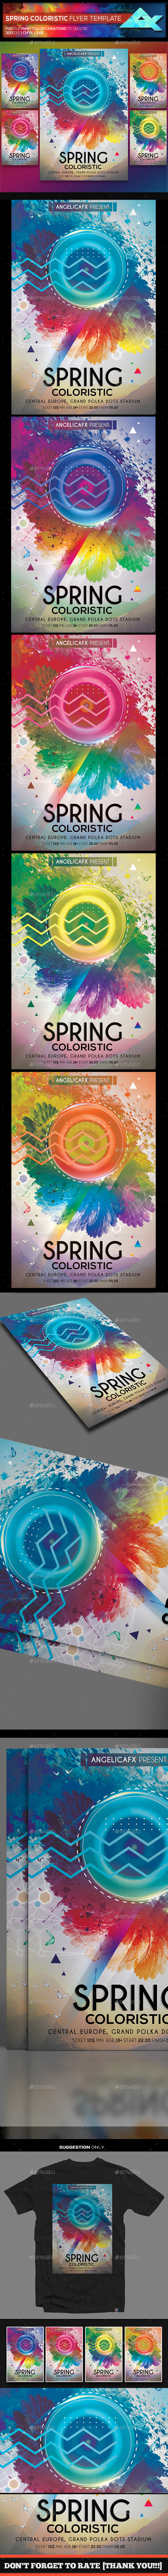 Spring Colorific Flyer Template